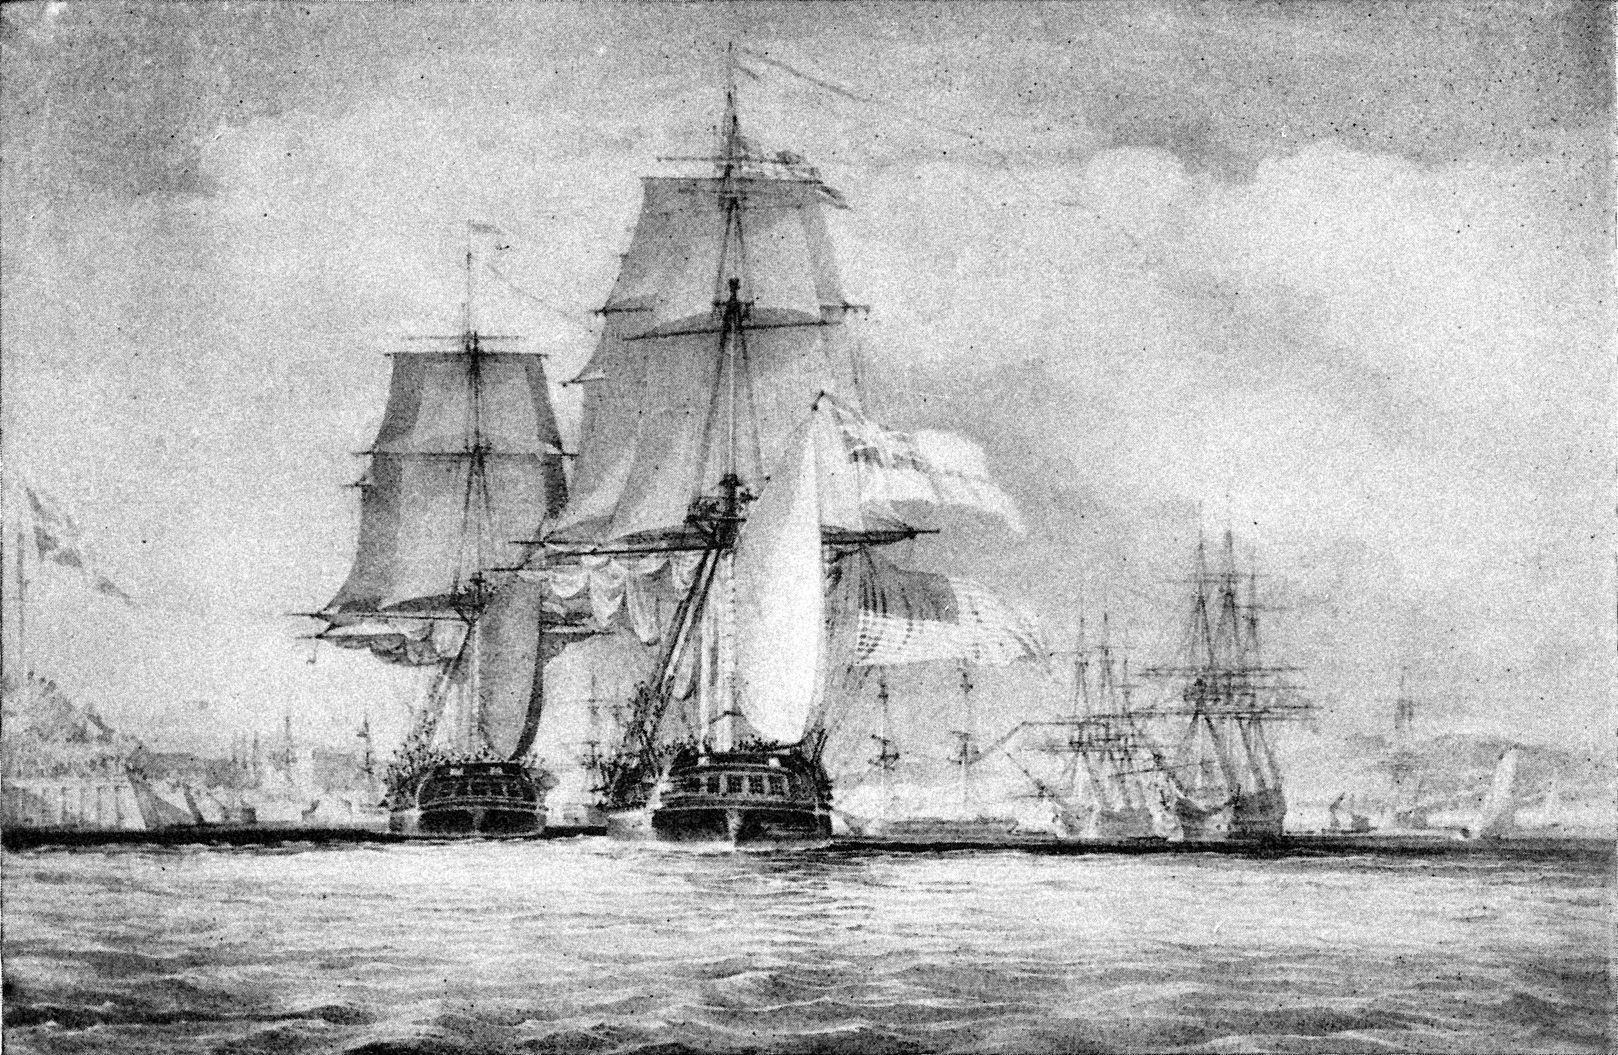 [The Shannon and the Chesapeake in Halifax Harbour, 1813]